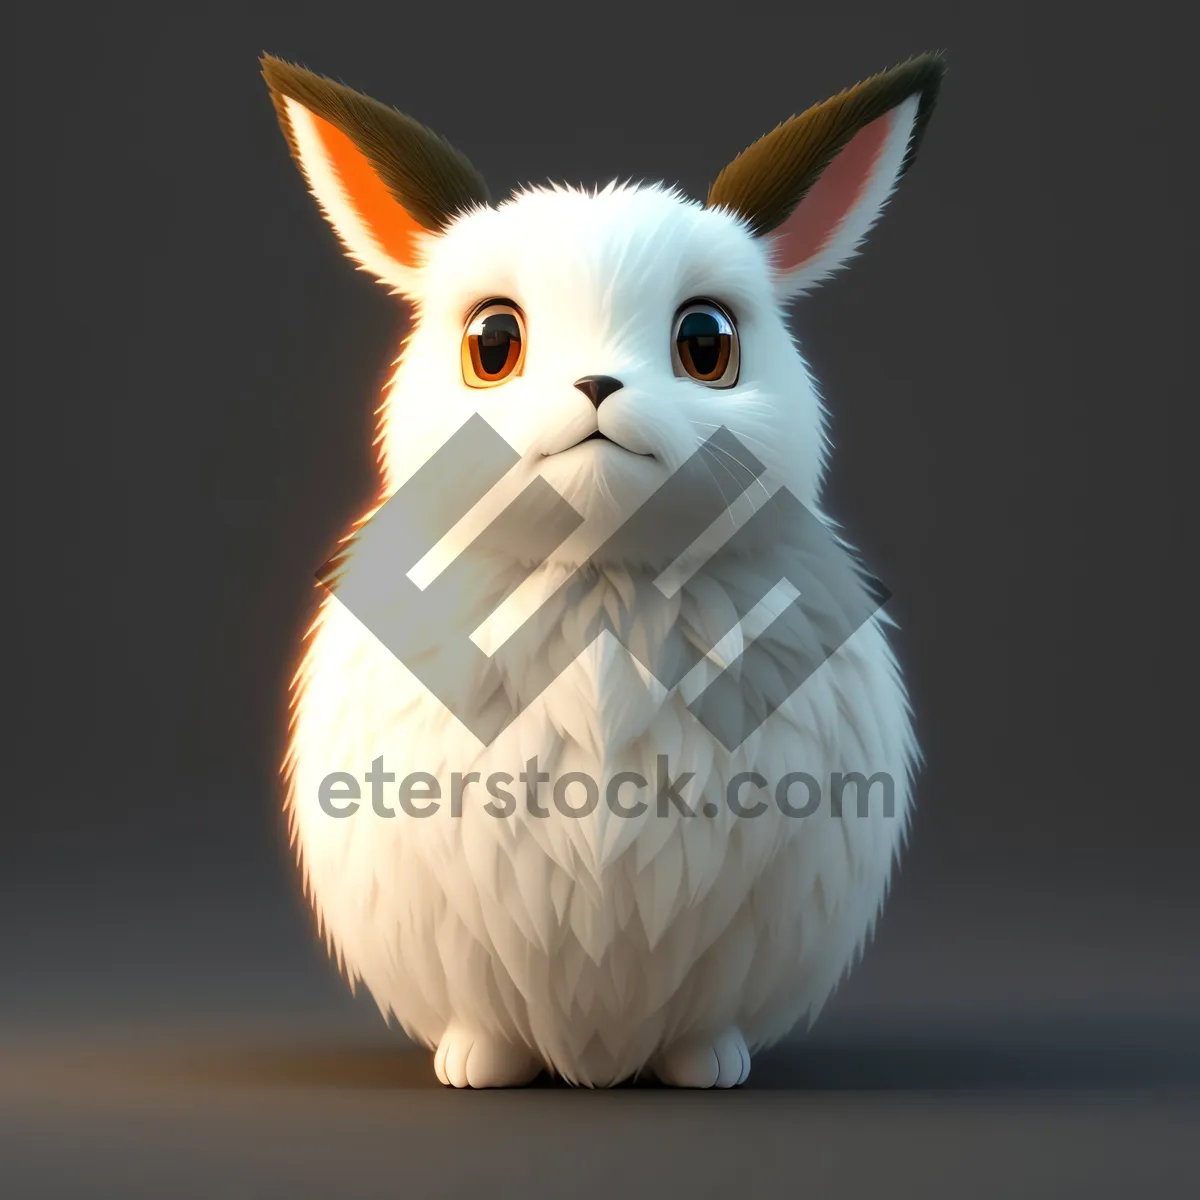 Picture of Cute White Bunny with Fluffy Ears